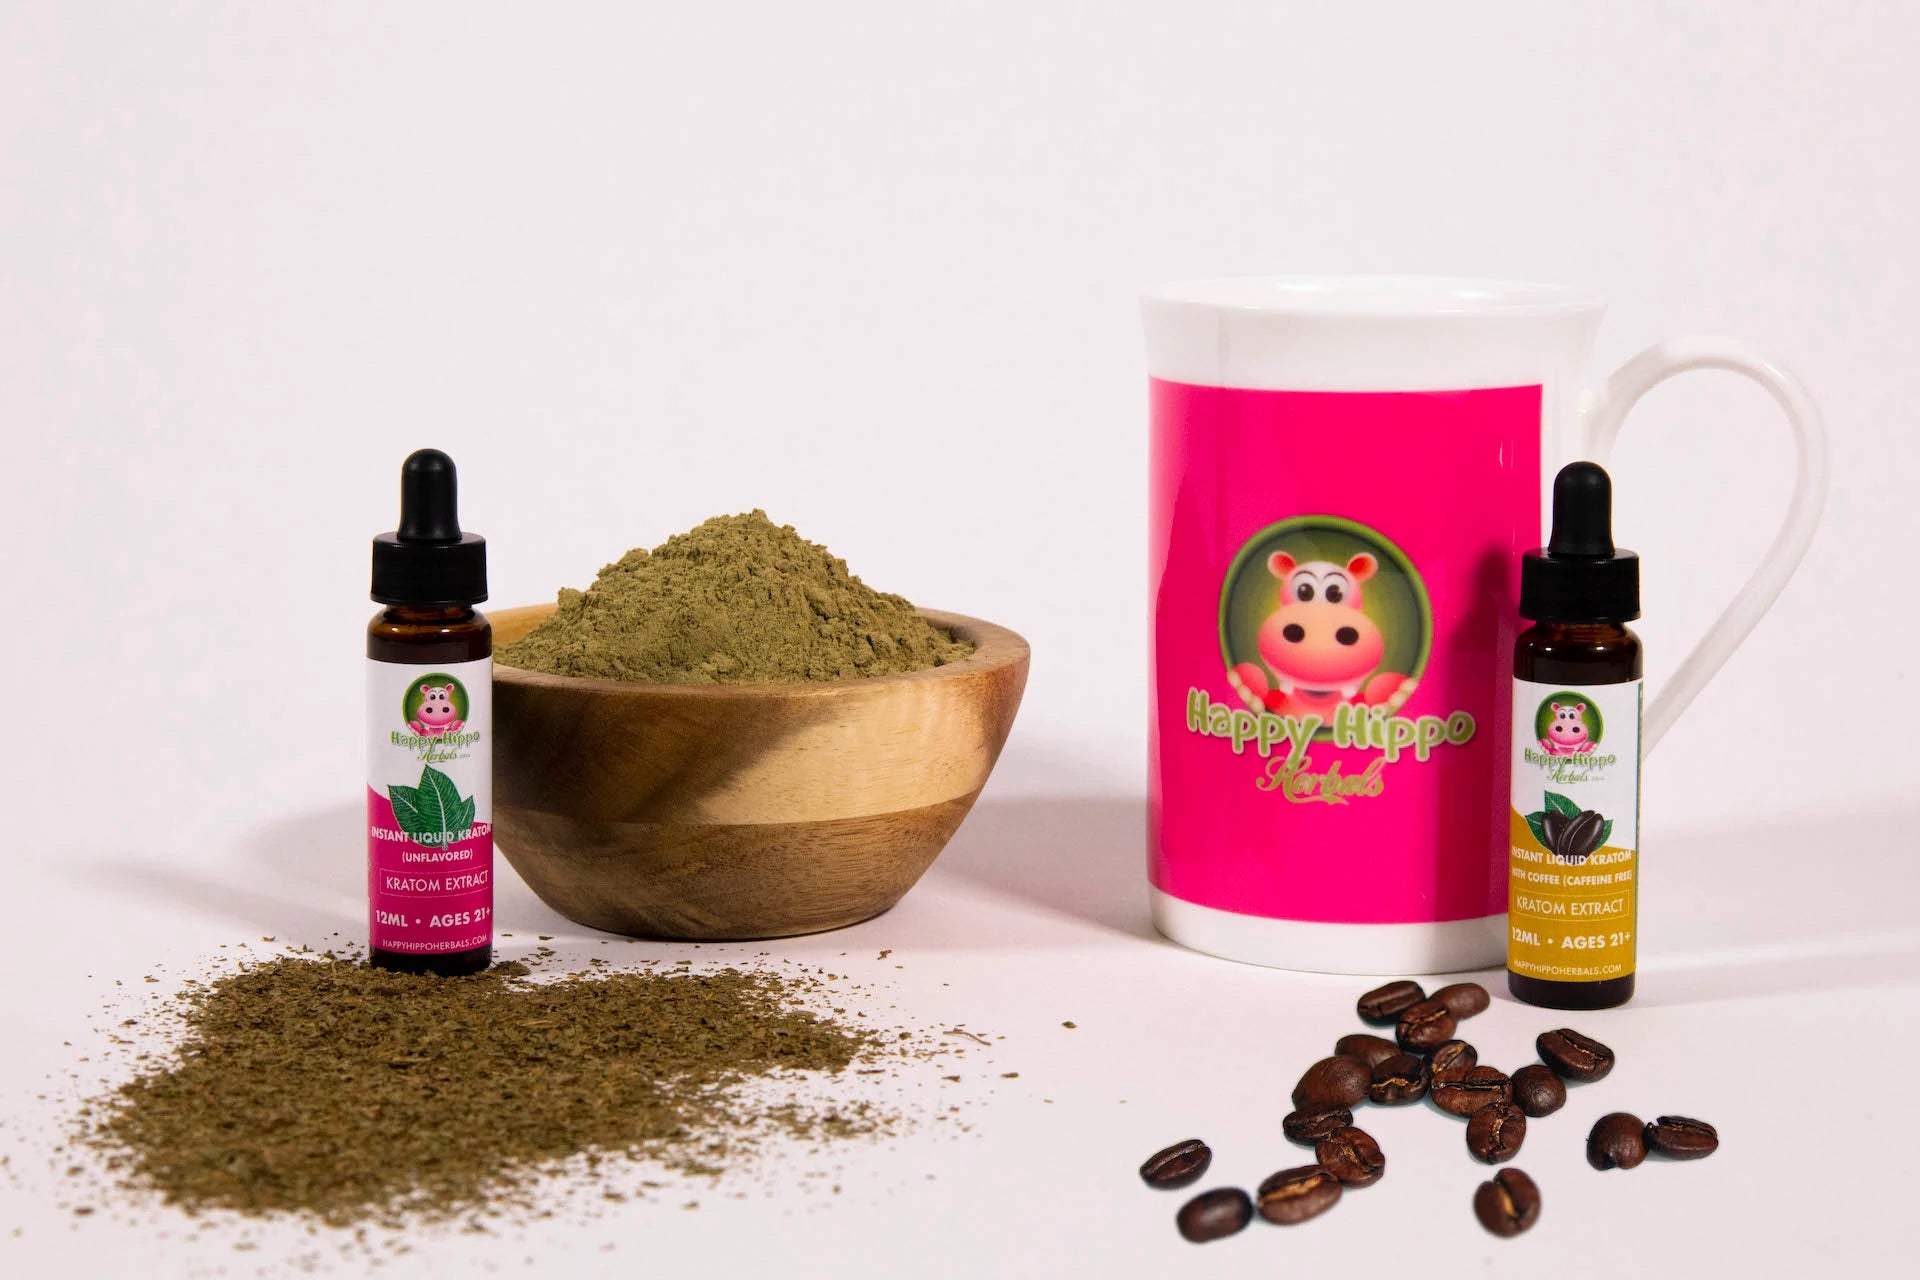 Product image depicting two dropper bottles of Happy Hippo Herbals brand Liquid Kratom Extract - One bottle is unflavored, while the other bottle is coffee flavor